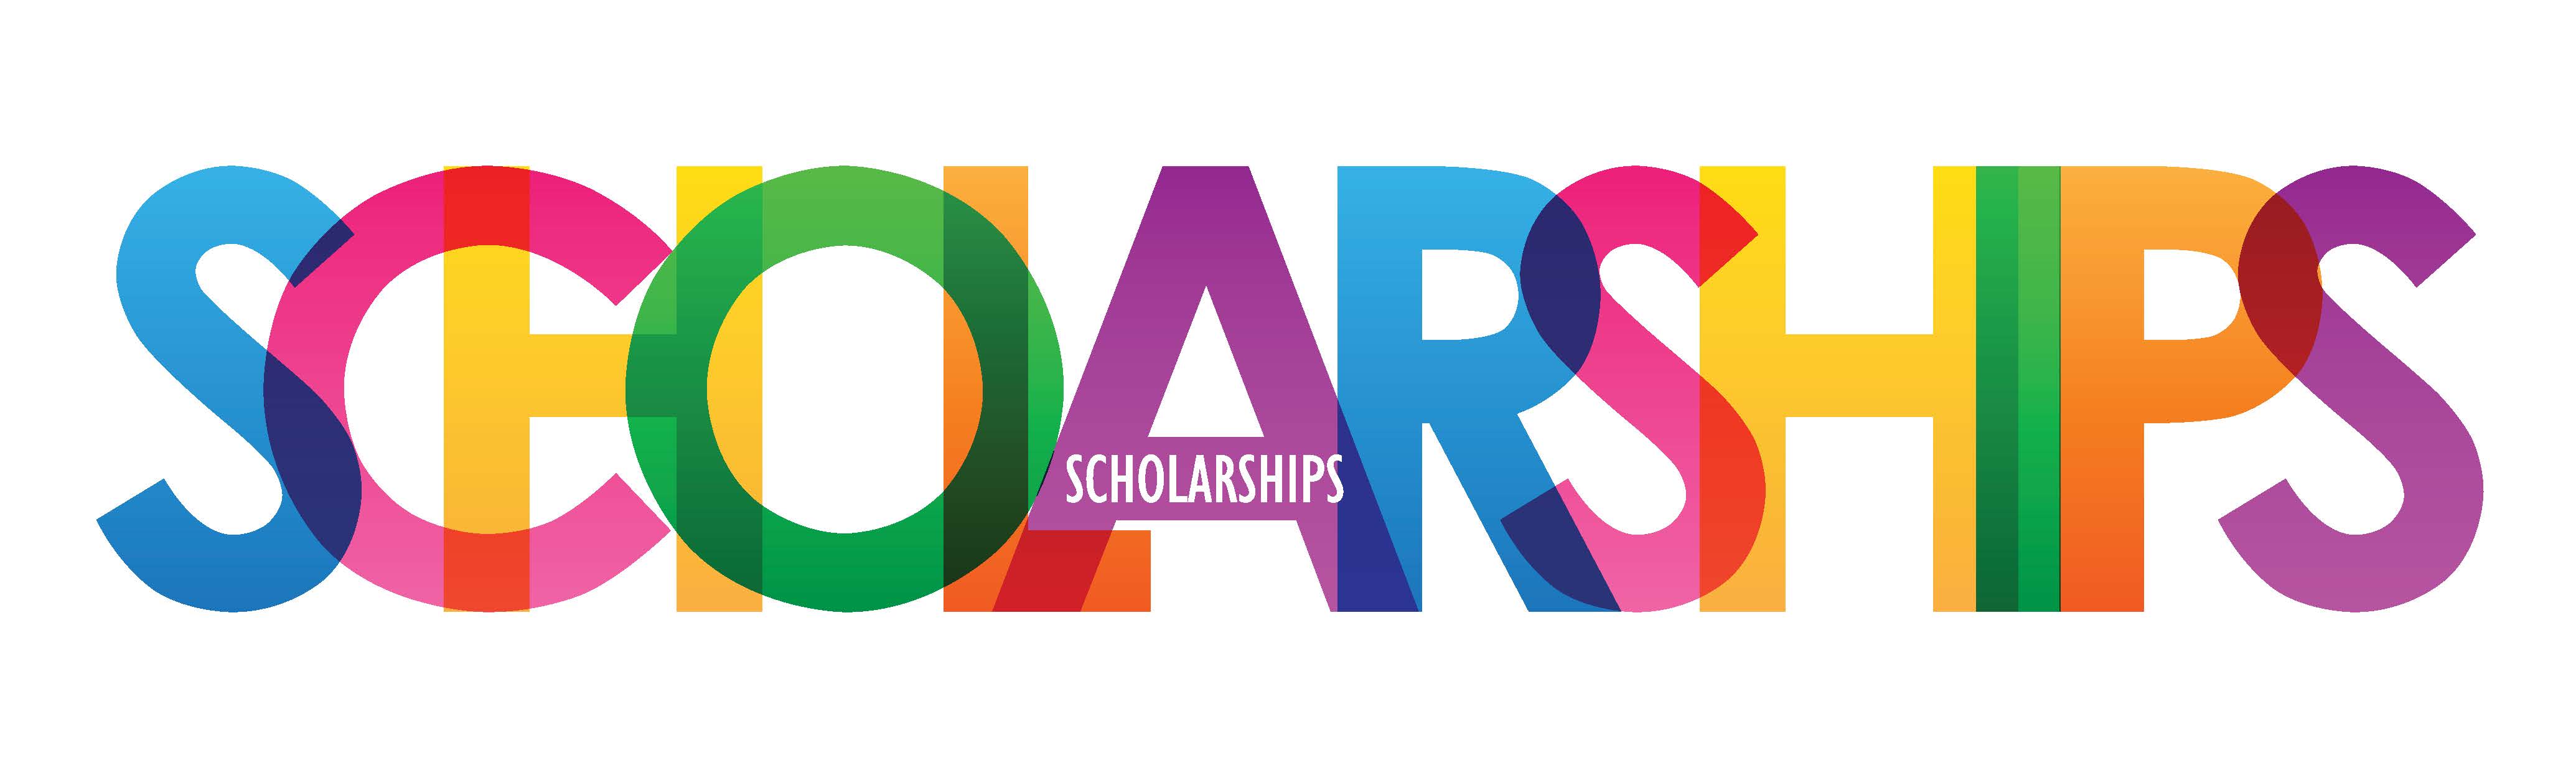 colorful overlapping block letters reading "Scholarships" 